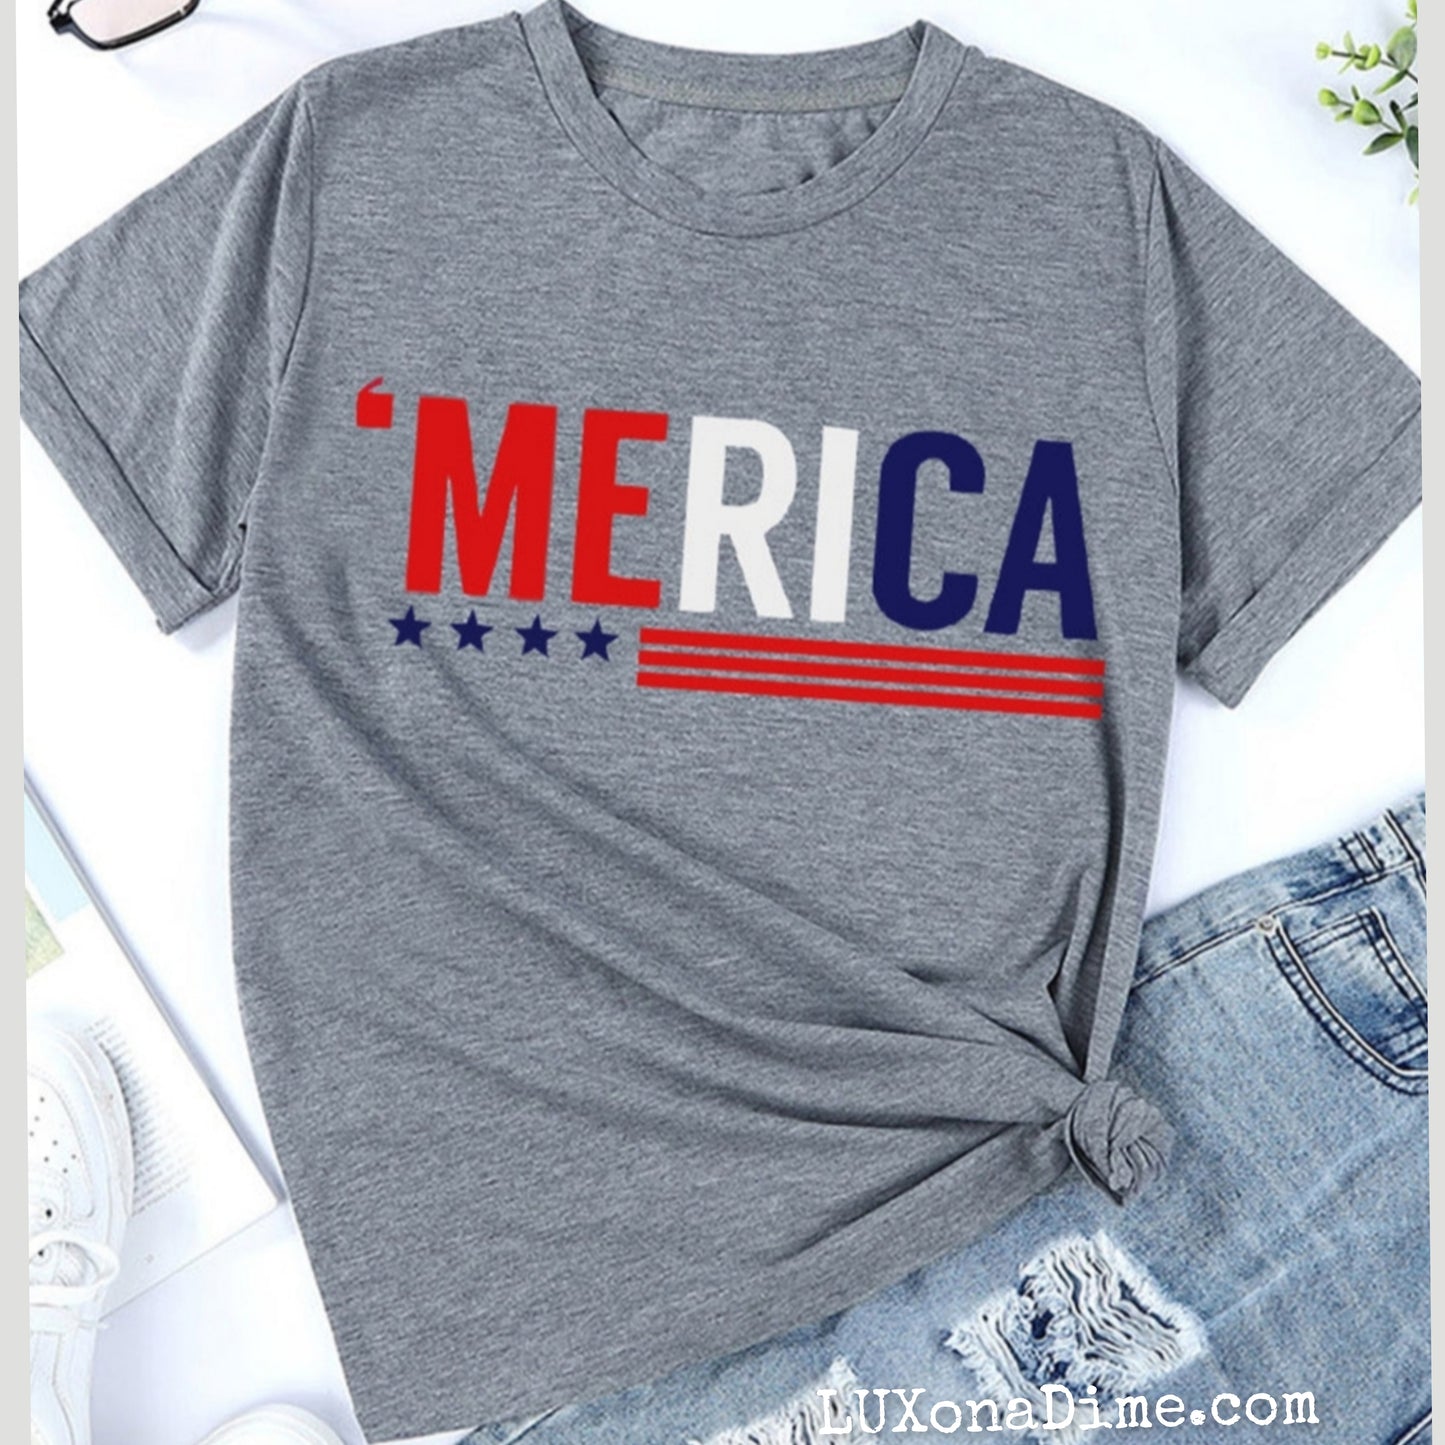 MERICA Letter Graphic American Crewneck Tee Shirt (Plus Size Available)